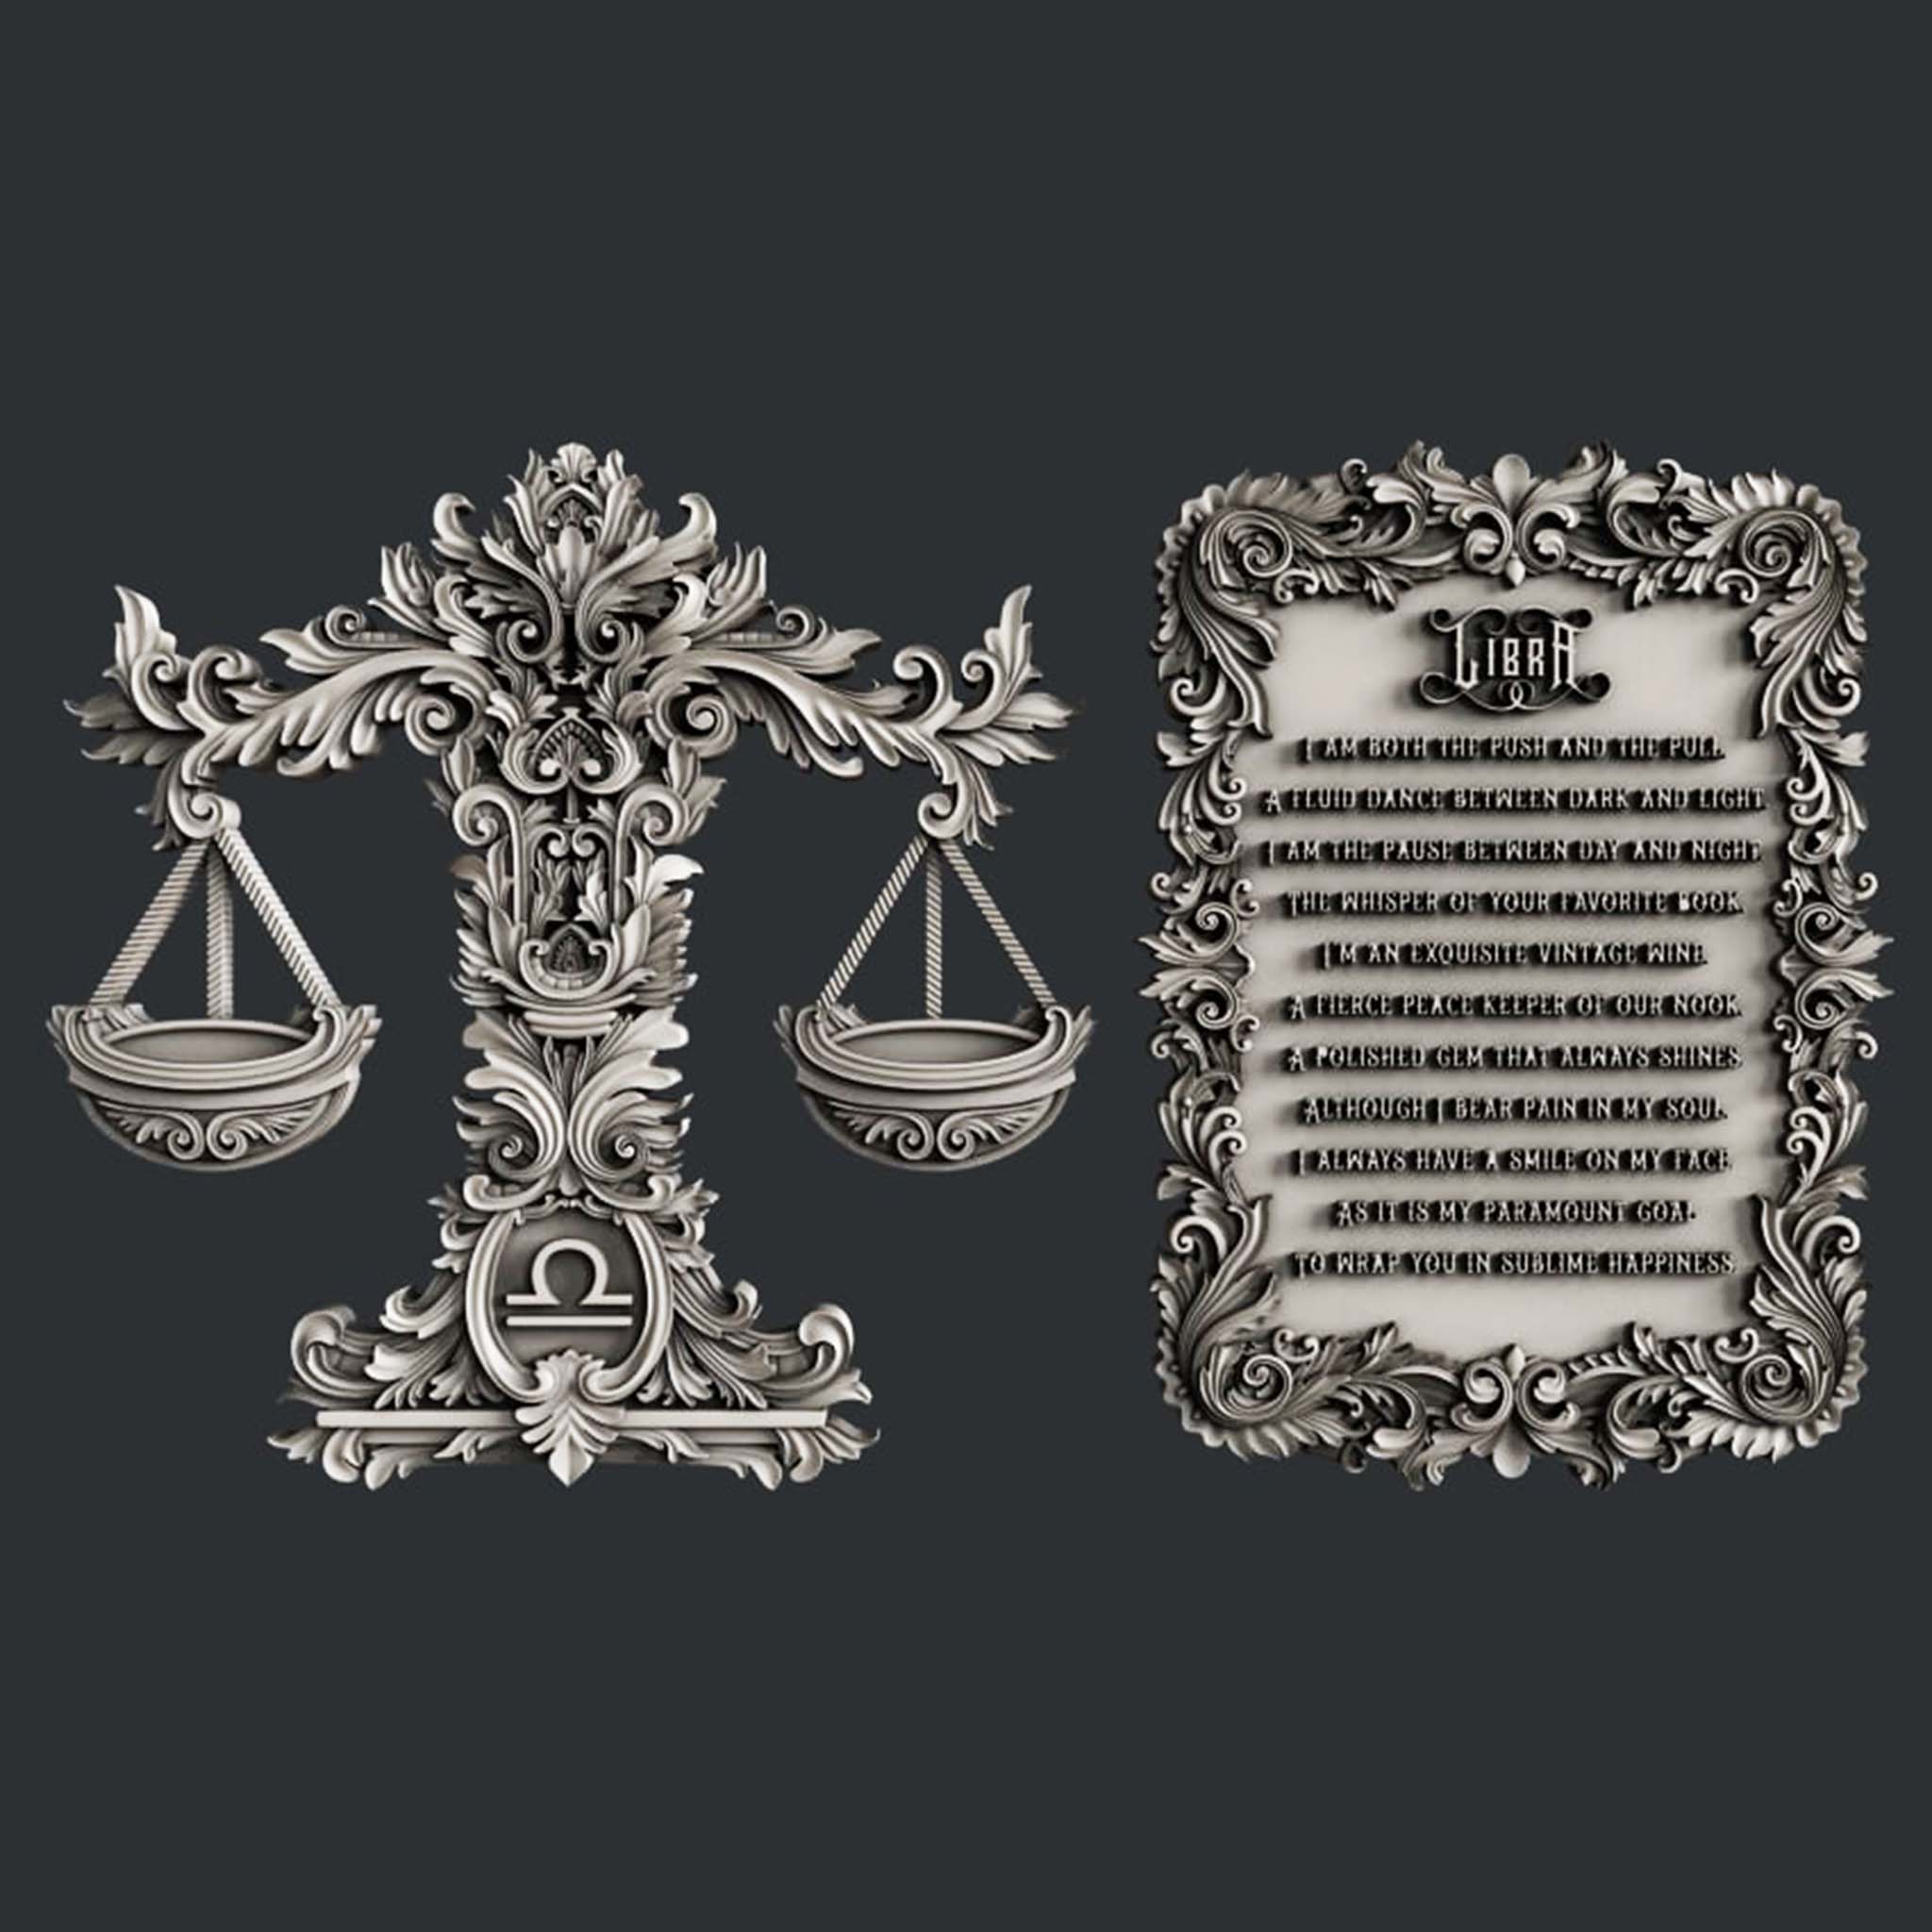 Grey silicone mold castings of an ornate set of Libra scales and a plaque that describes a Libra person are on a dark grey background.